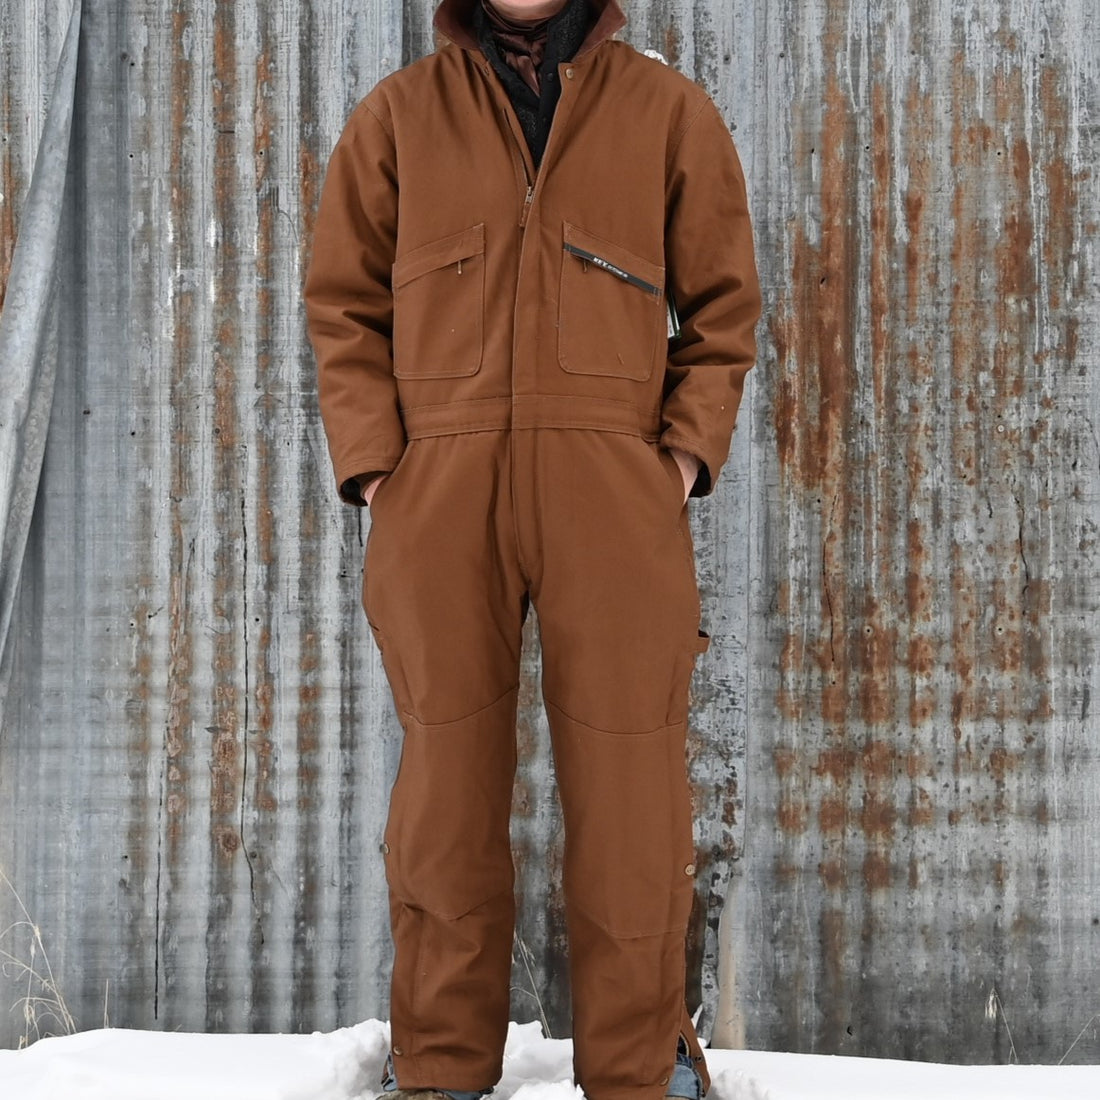 Key Ind Insulated Coverall in Saddle view of coveralls